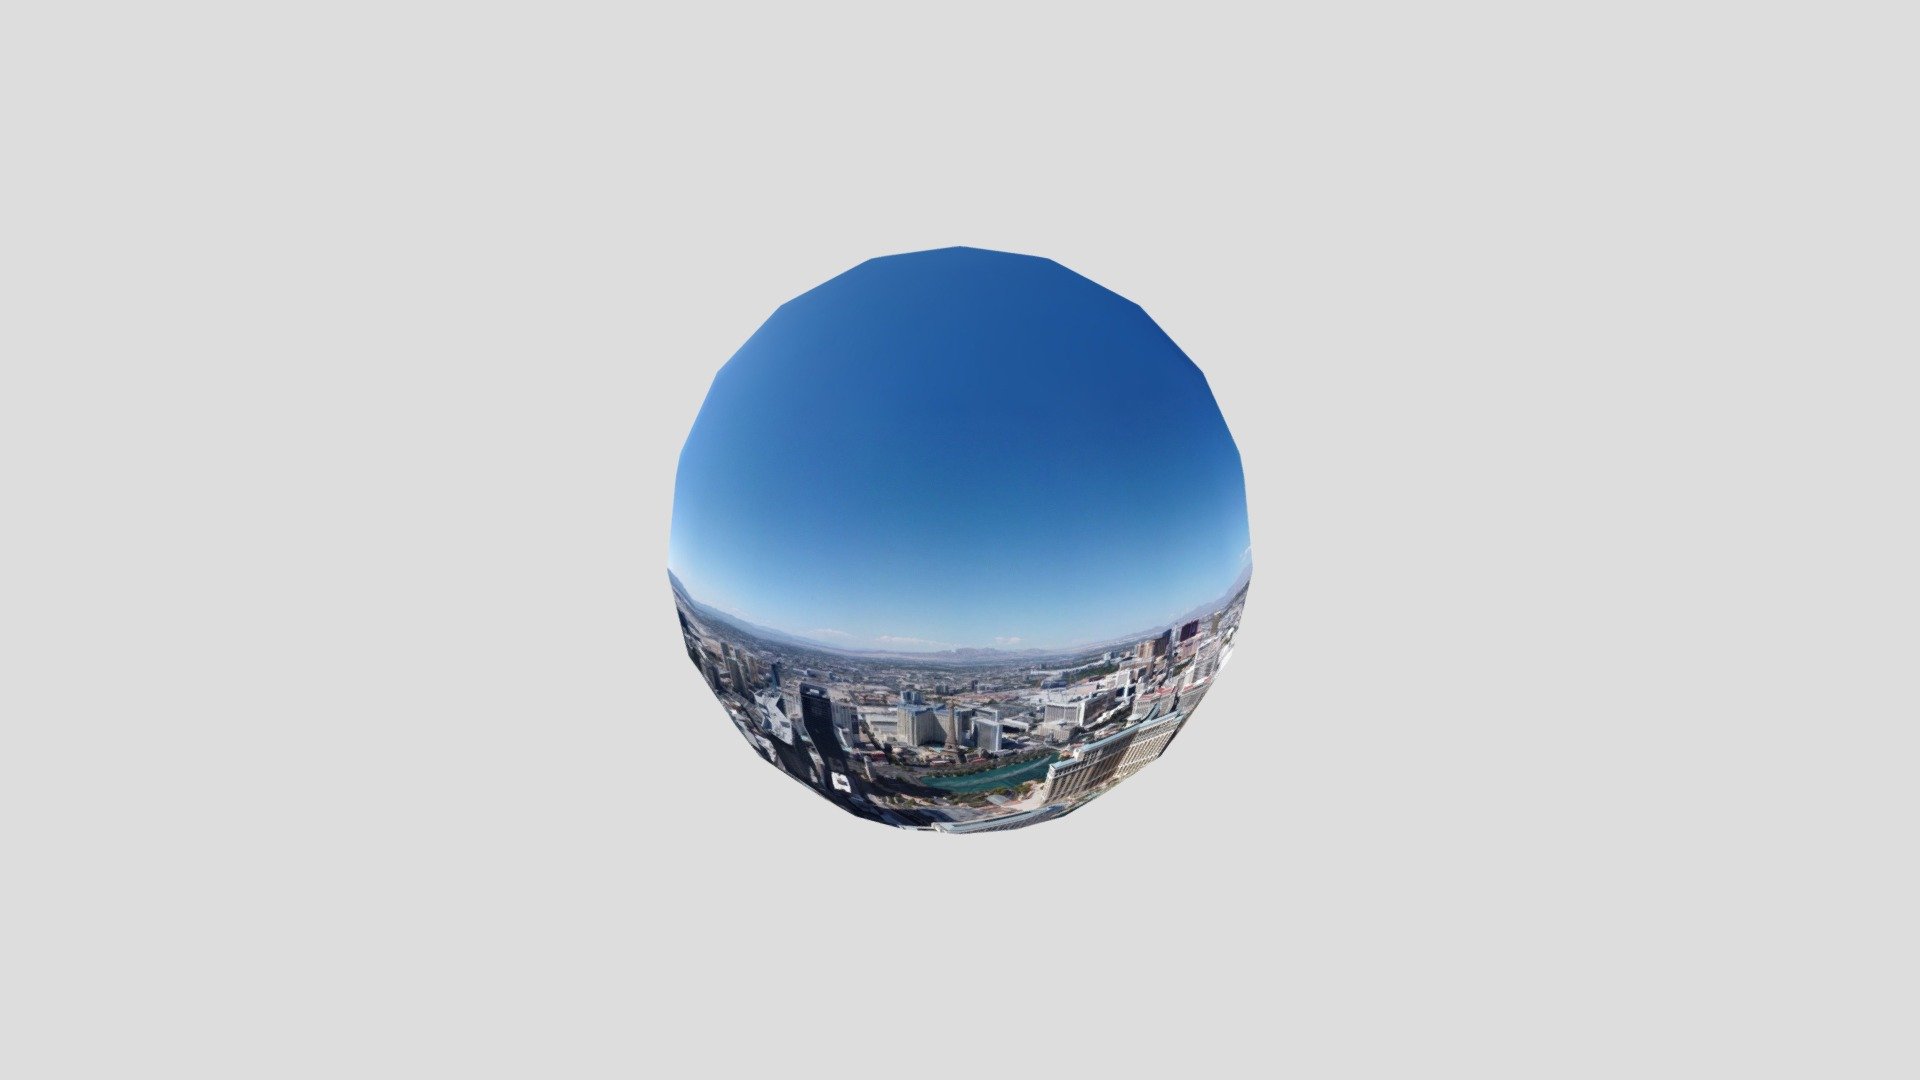 Spatial Skybox download. www.skyboxmeta.com (1 Free Download Every month)
Follow me on Spatial: https://spatial.io/@mr_xarvel
Follow me on Instagram: https://instagram.com/mr.xarvel &amp; https://instagram.com/metaskybox - Xarvel's Day Cityscape 2 - Spatial Skybox - Download Free 3D model by Xarvel 3d model